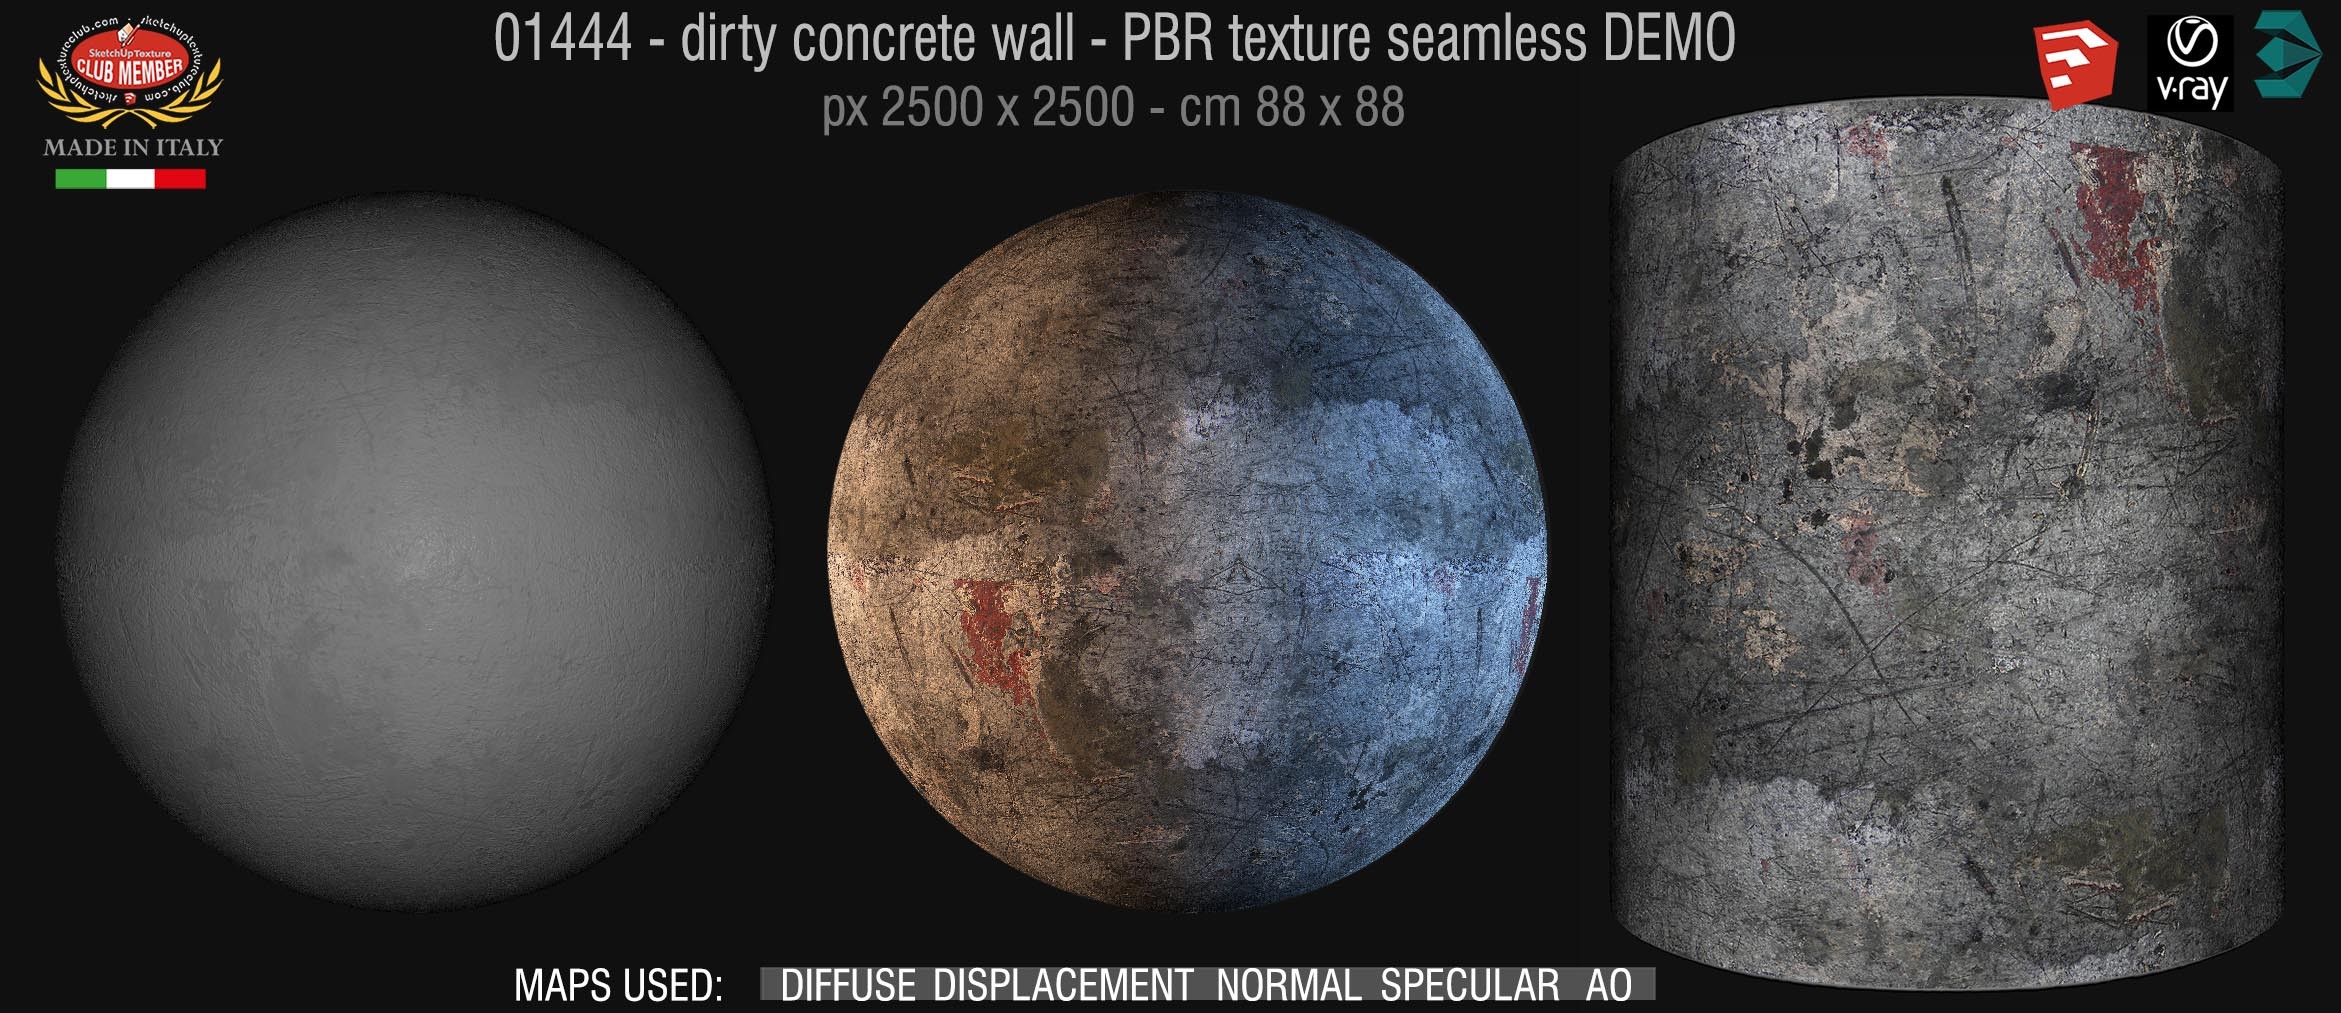 01444 Concrete bare dirty wall PBR texture seamless DEMO